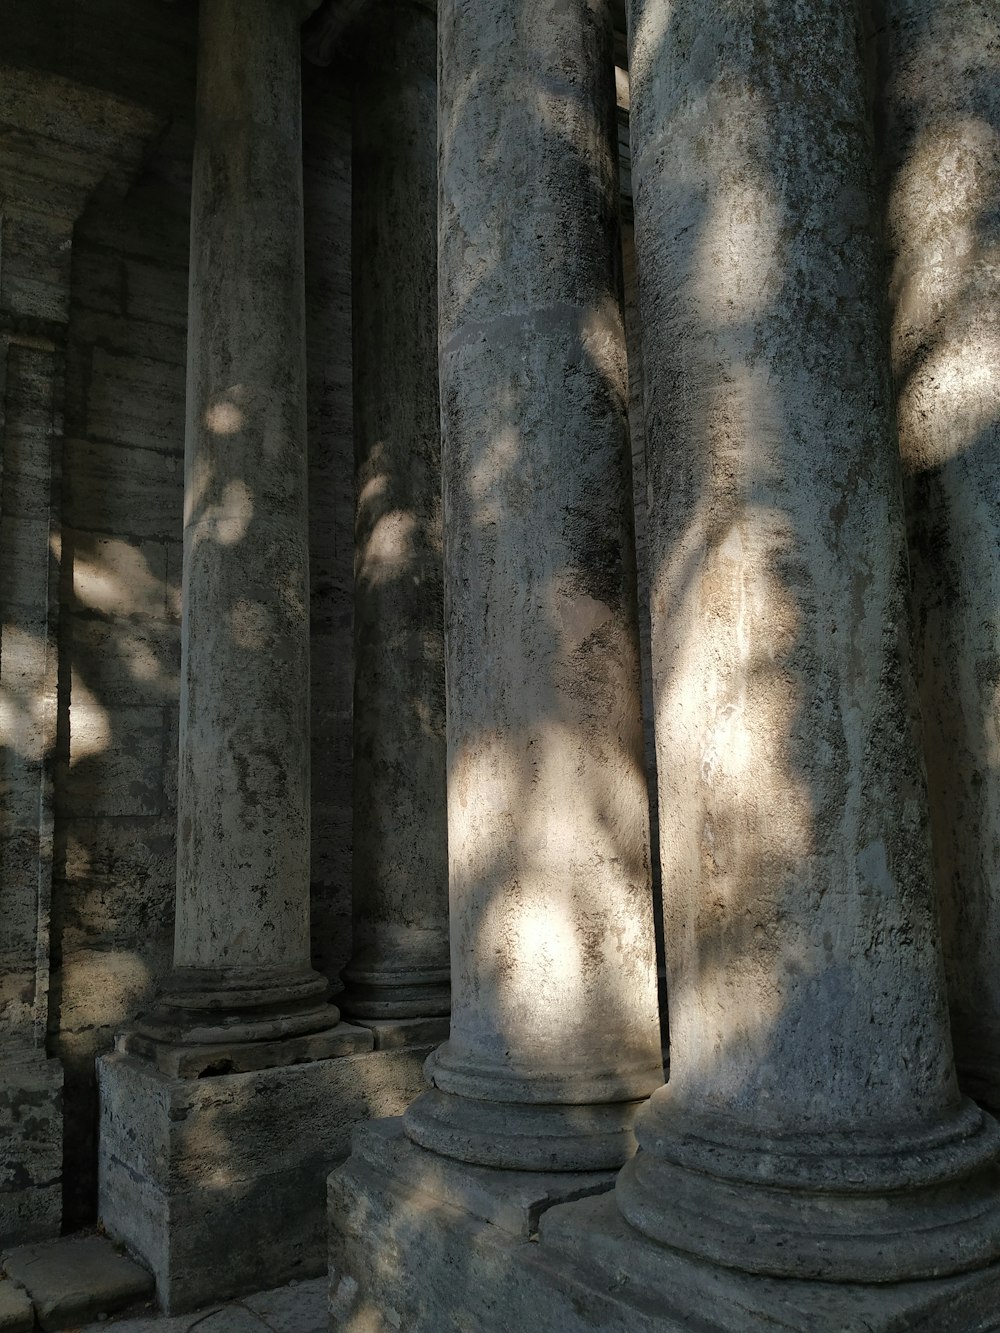 a row of stone pillars sitting next to each other